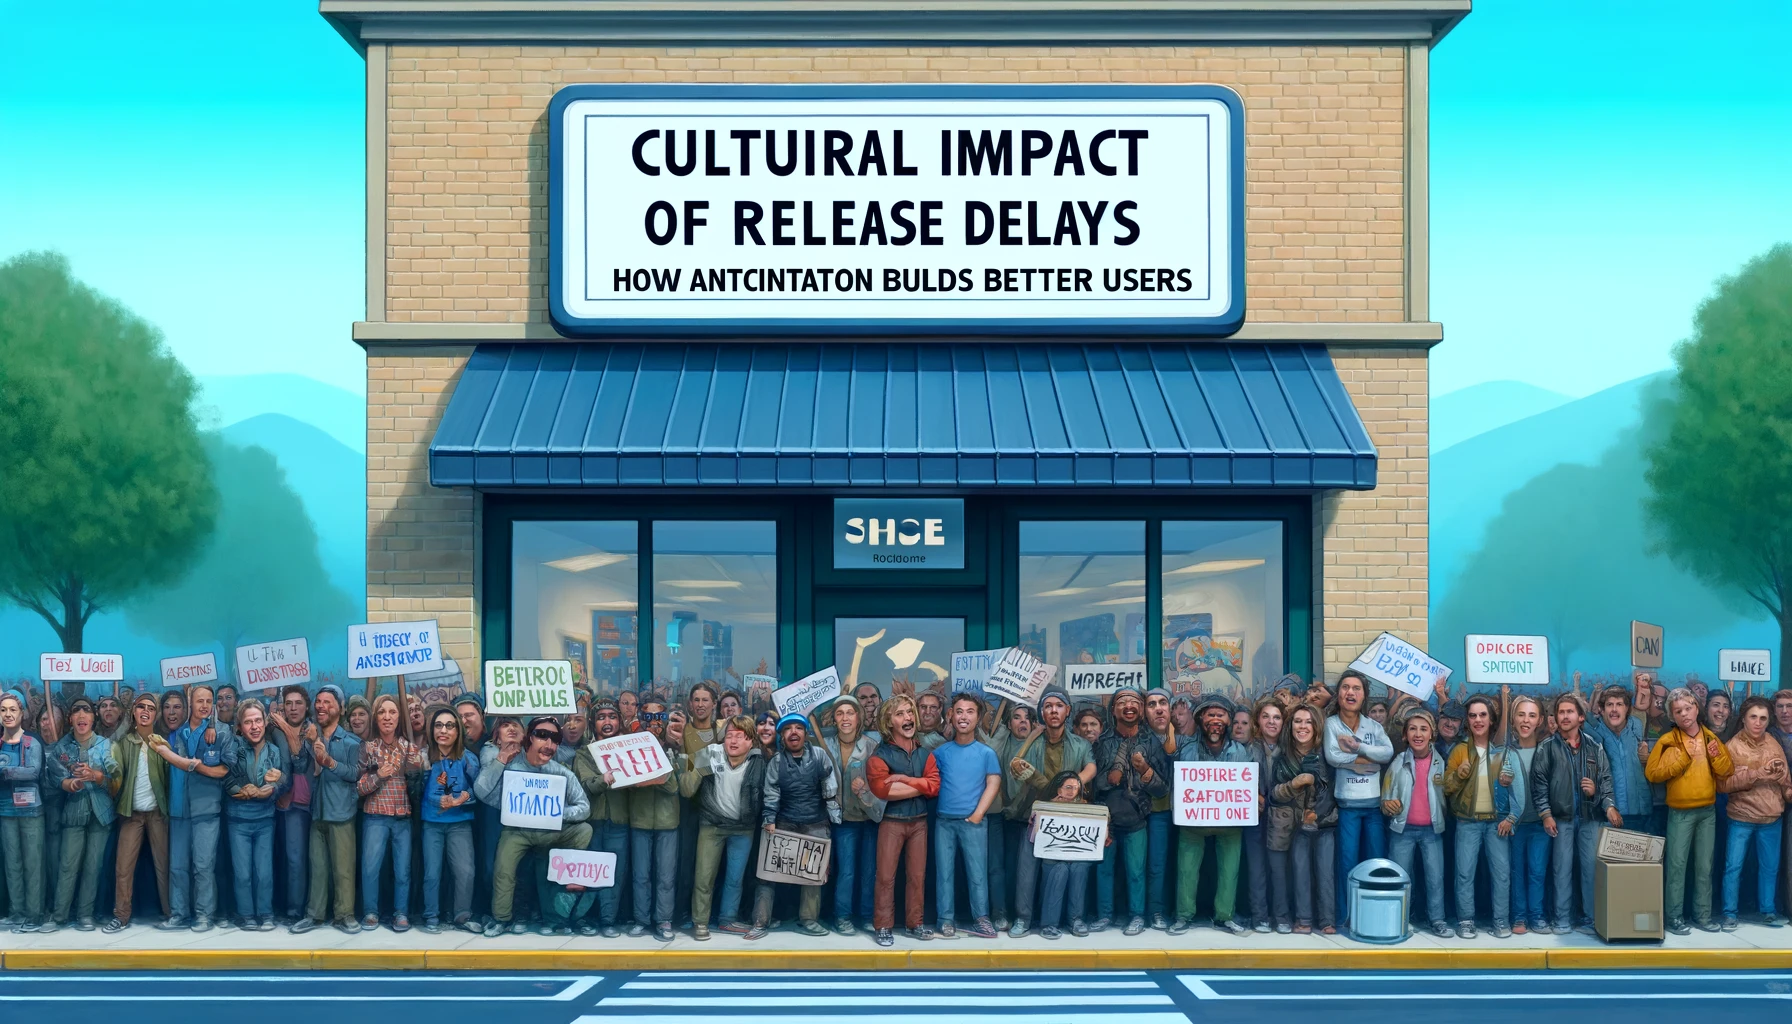 Cultural Impact of Release Delays: How Anticipation Builds Better Users